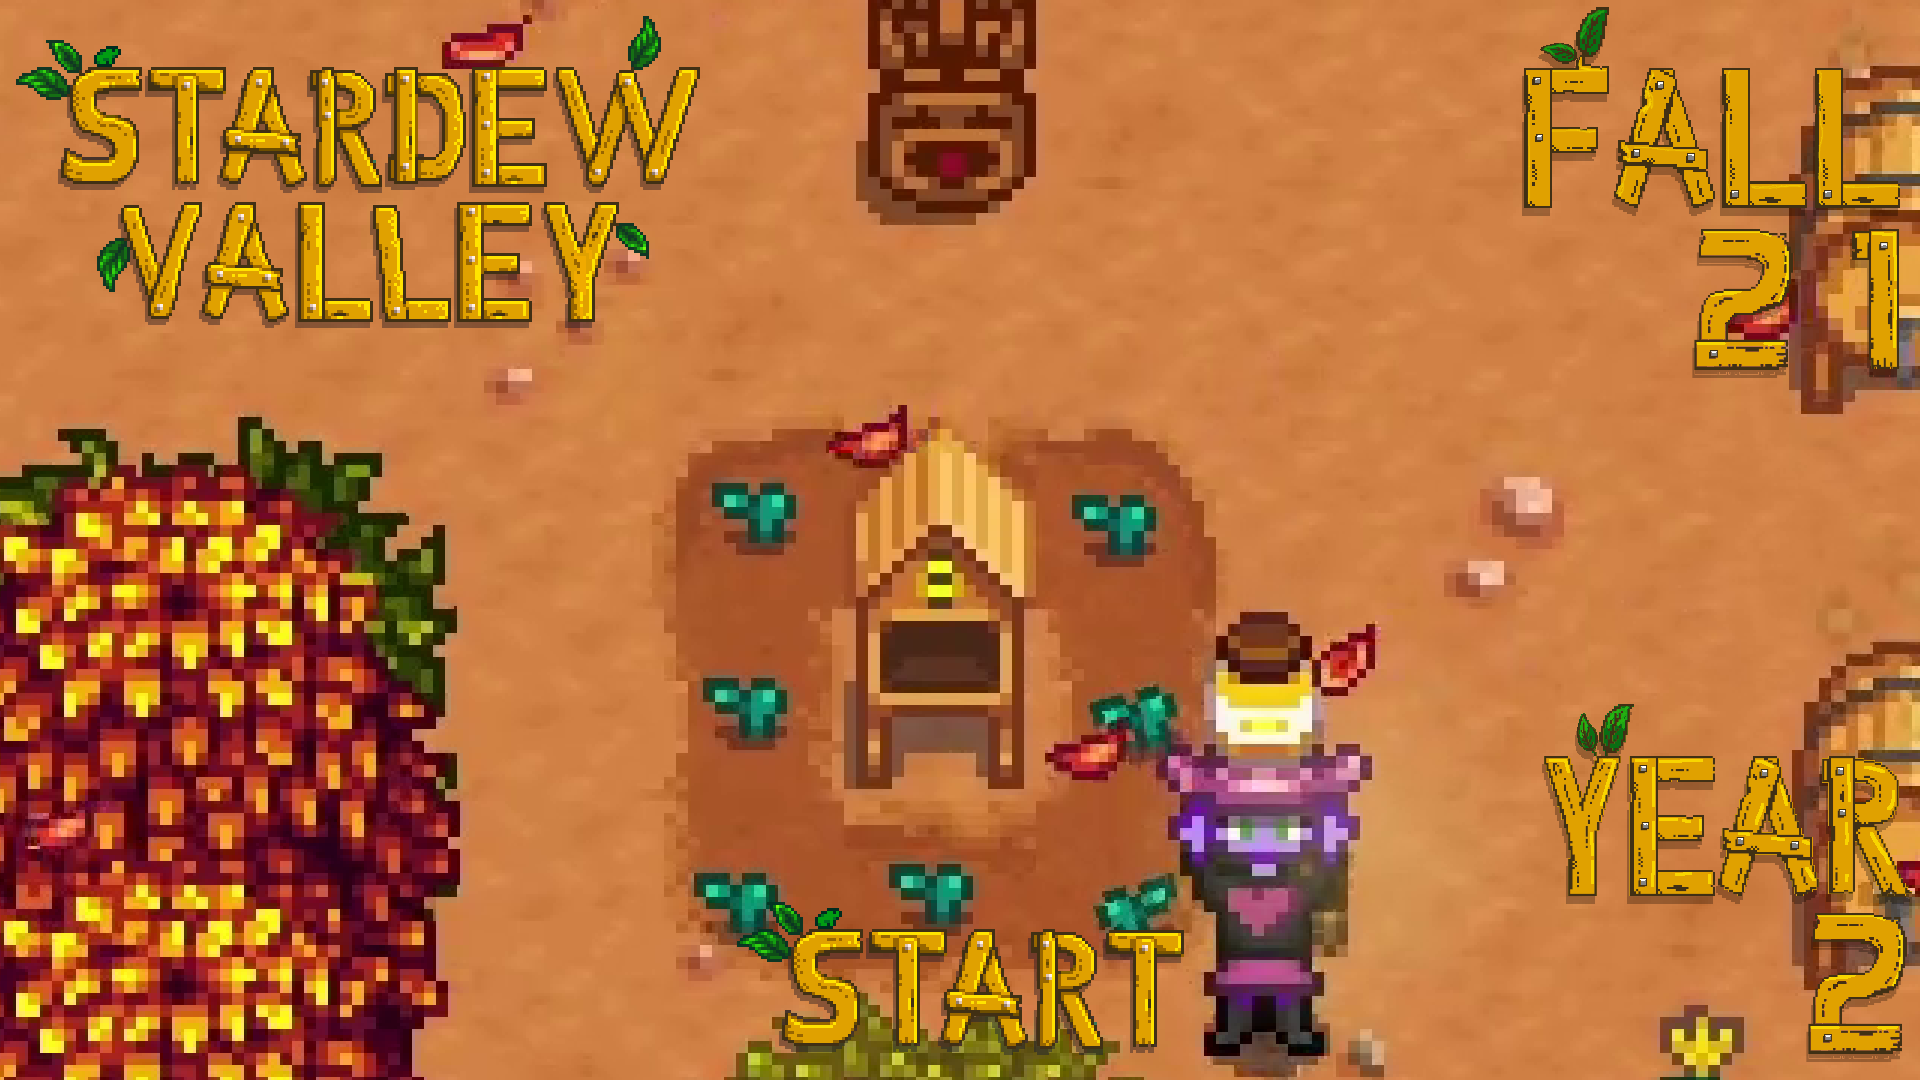 Some of That Old Country Wild Honey – Stardew Valley, Fall 21, Year 2, Start